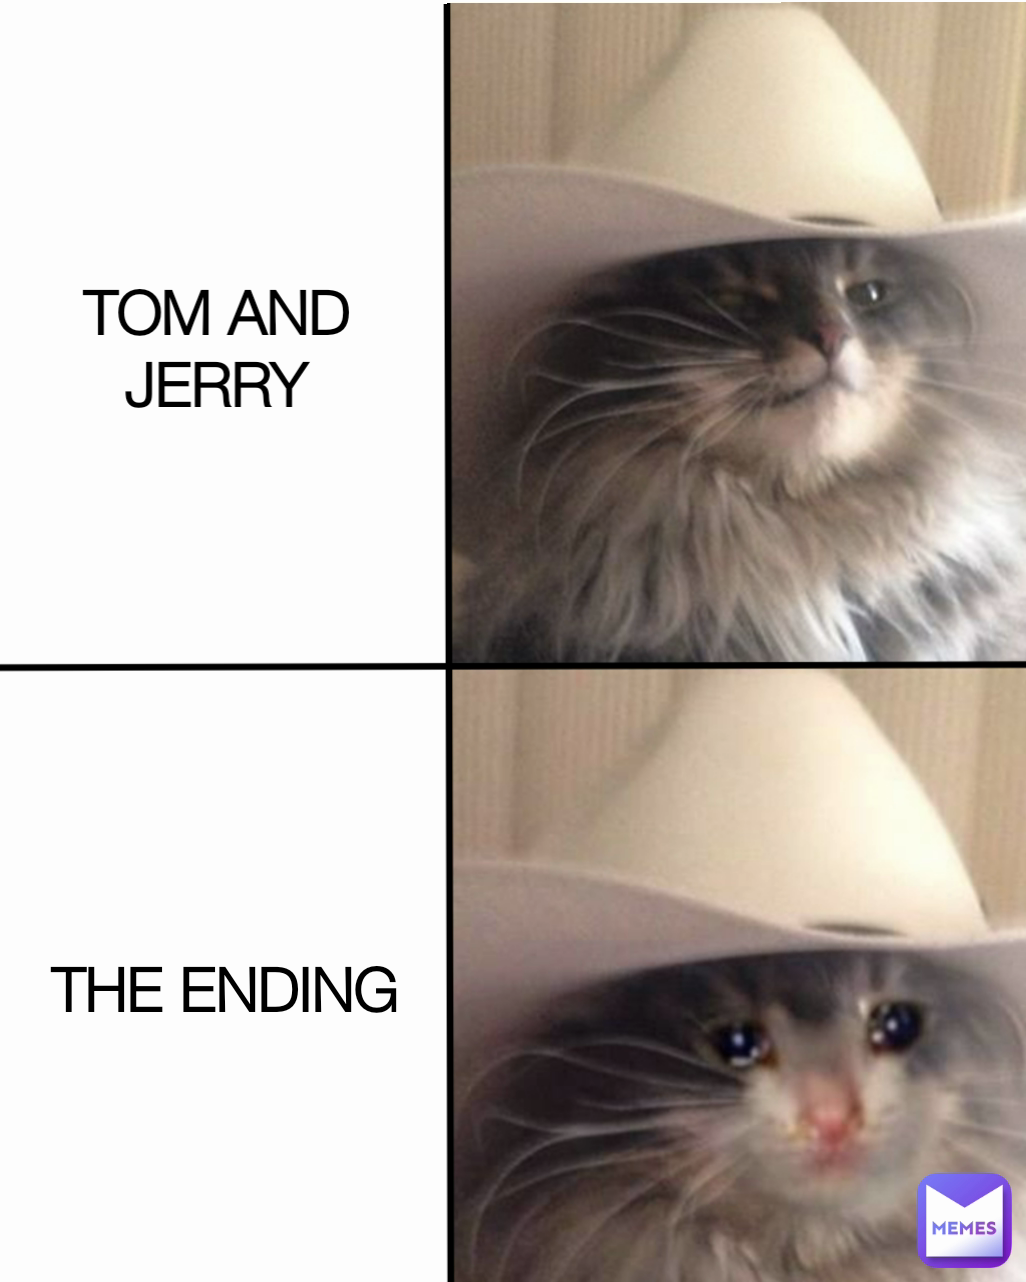 TOM AND JERRY THE ENDING